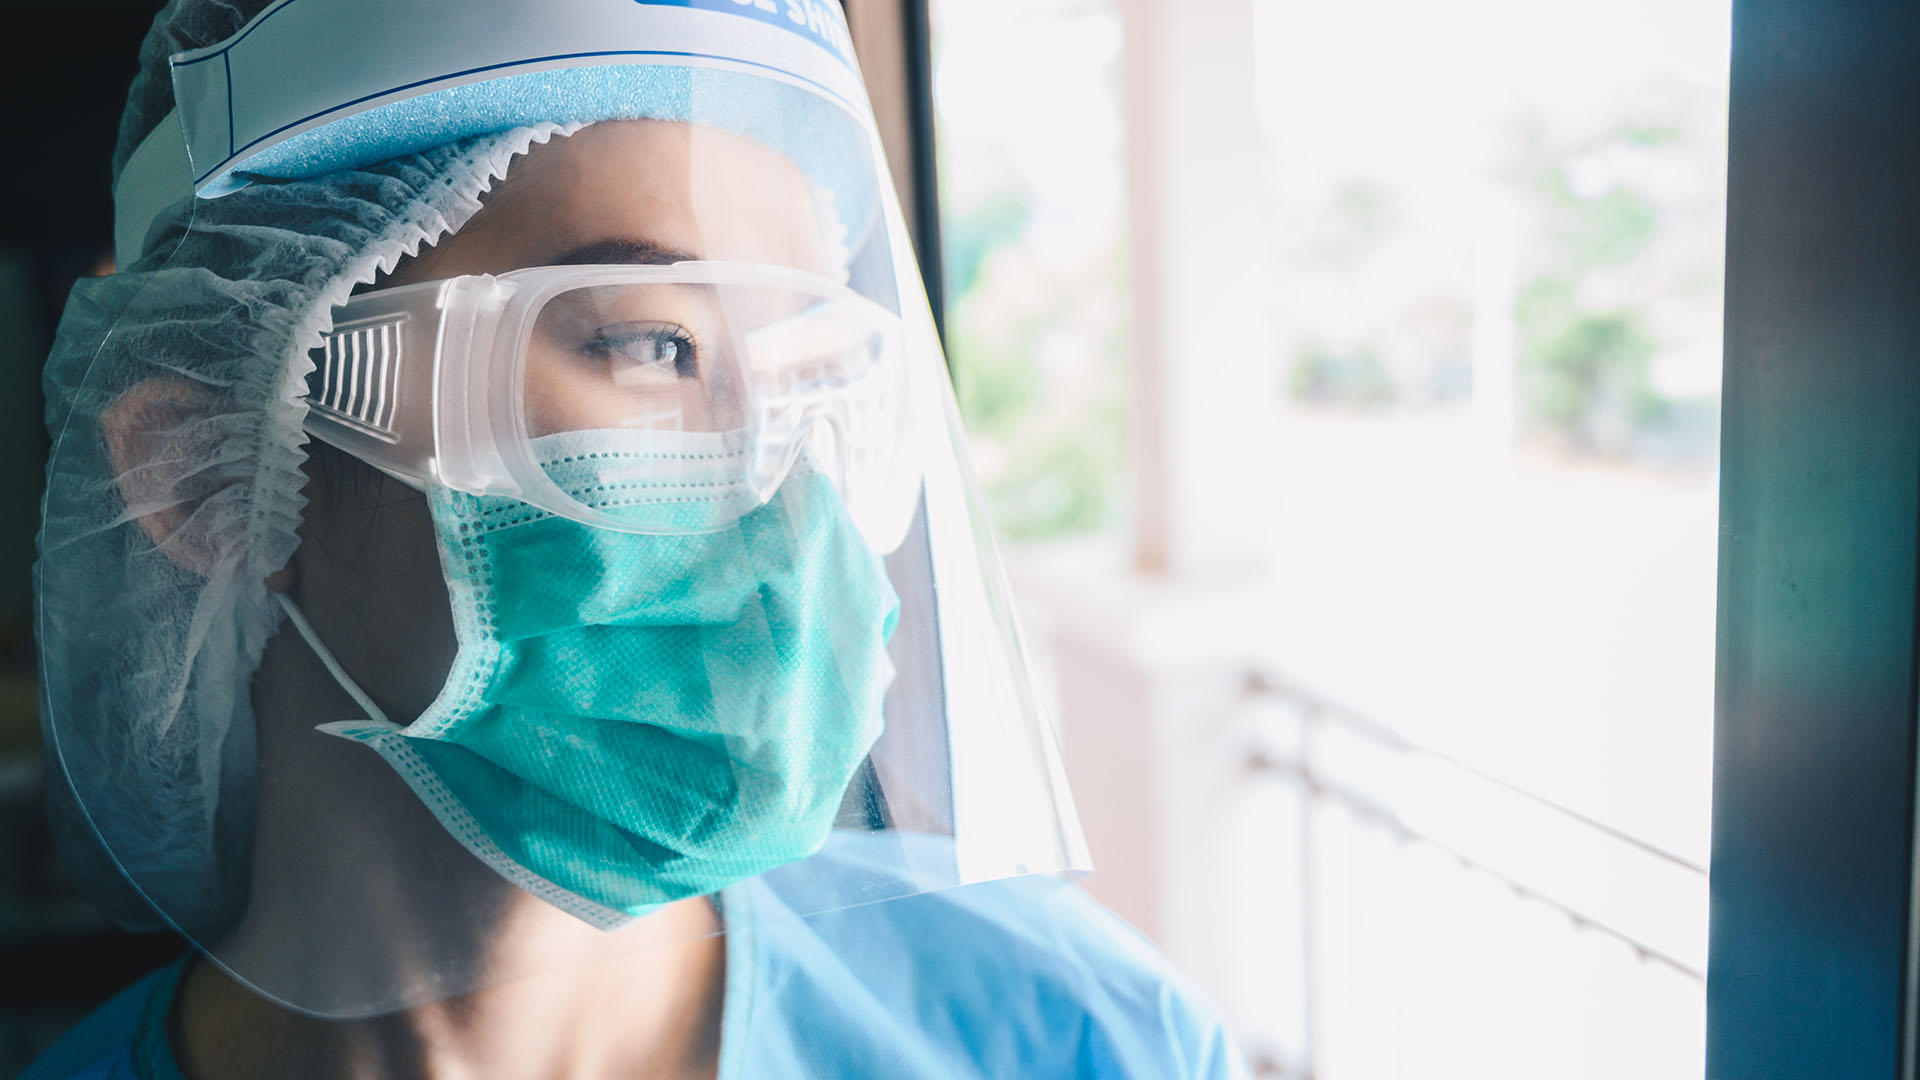 2021  High prevalence of psychological distress among healthcare workers  during pandemic: study - University of Wollongong – UOW